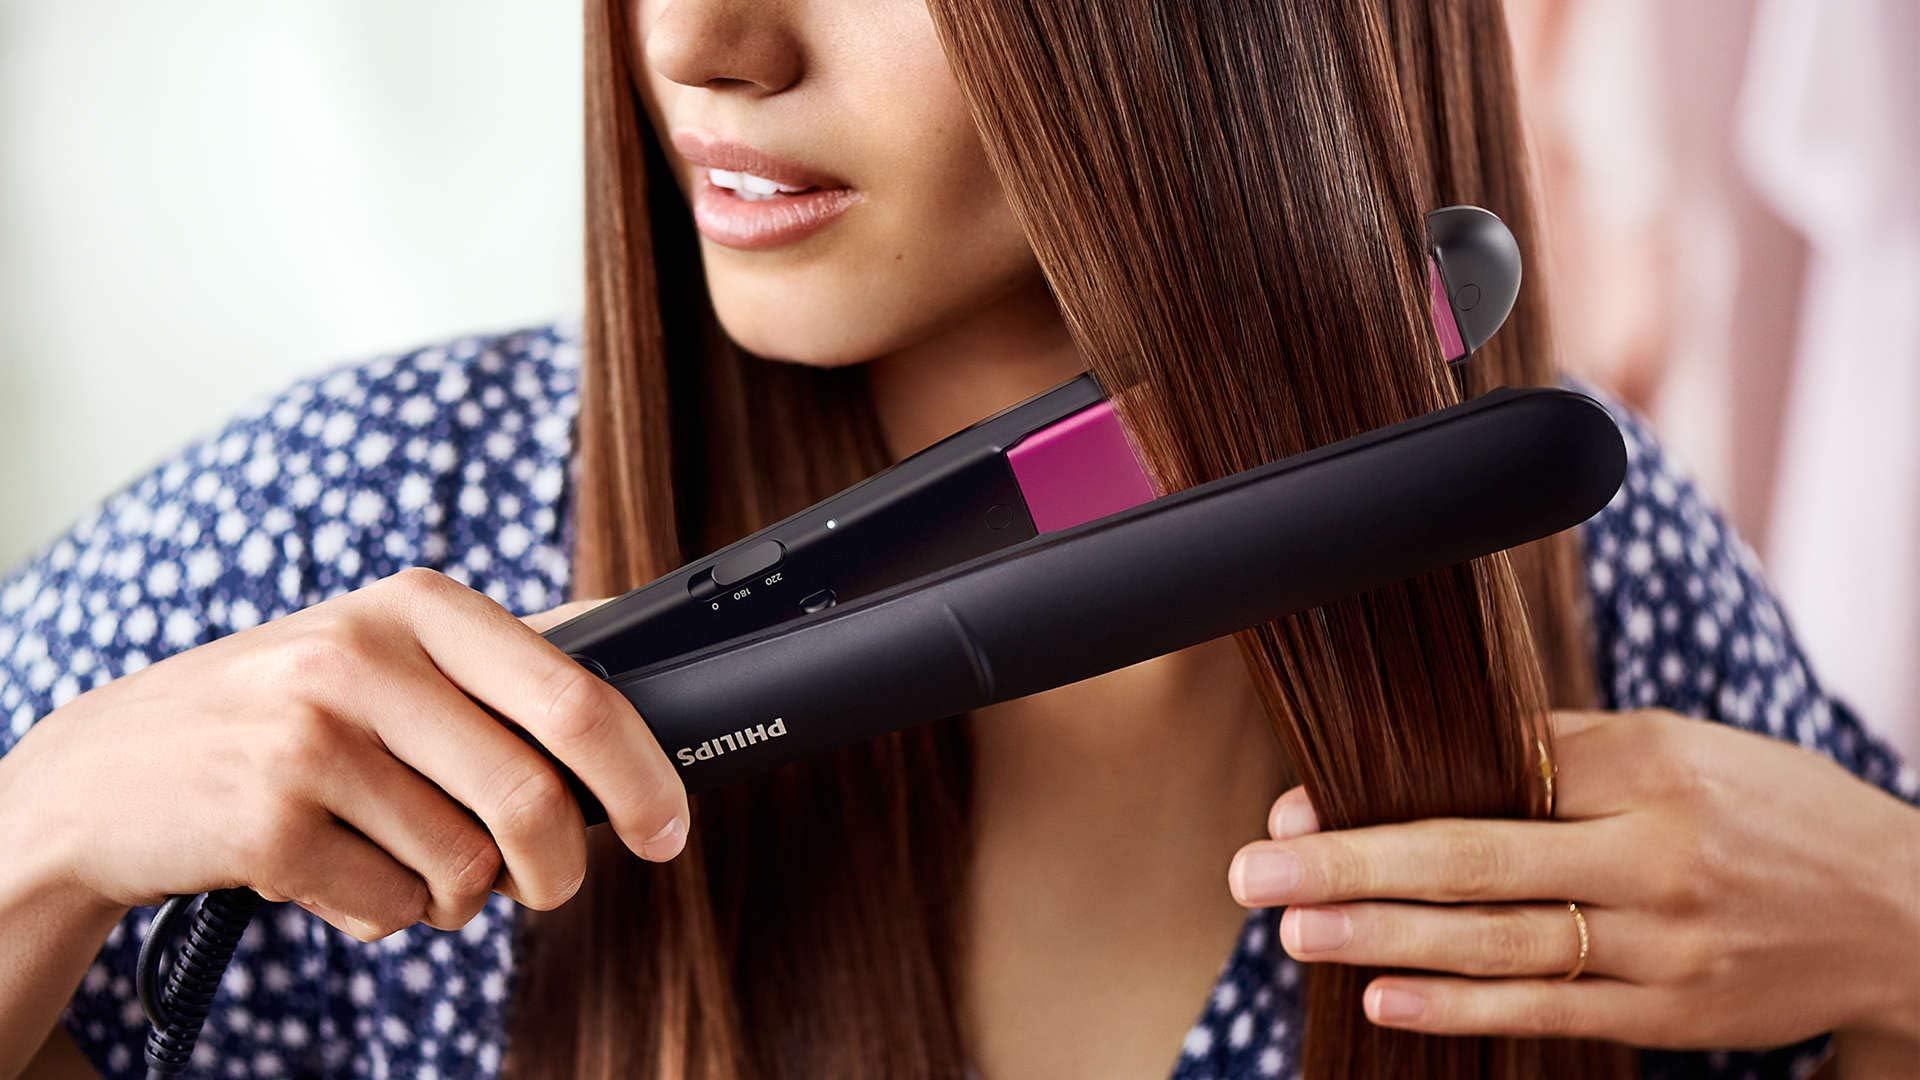 Philips StraightCare Essential ThermoProtect straightener. 2 temperature settings. Temperature range up to 220°C. 3 pin, BHS375/03.